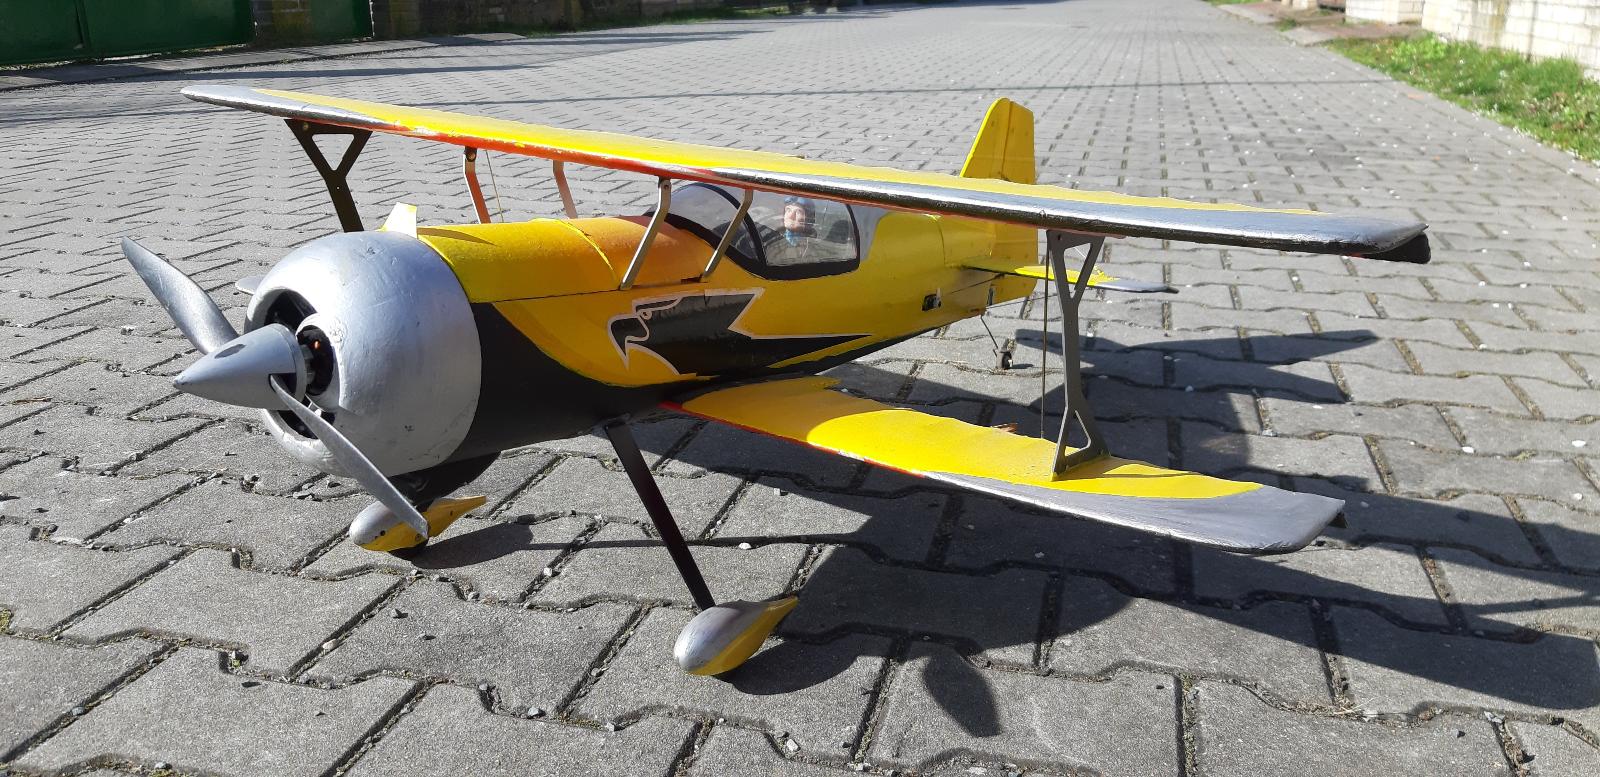 Pitts Pithon-1050mm - RC modely